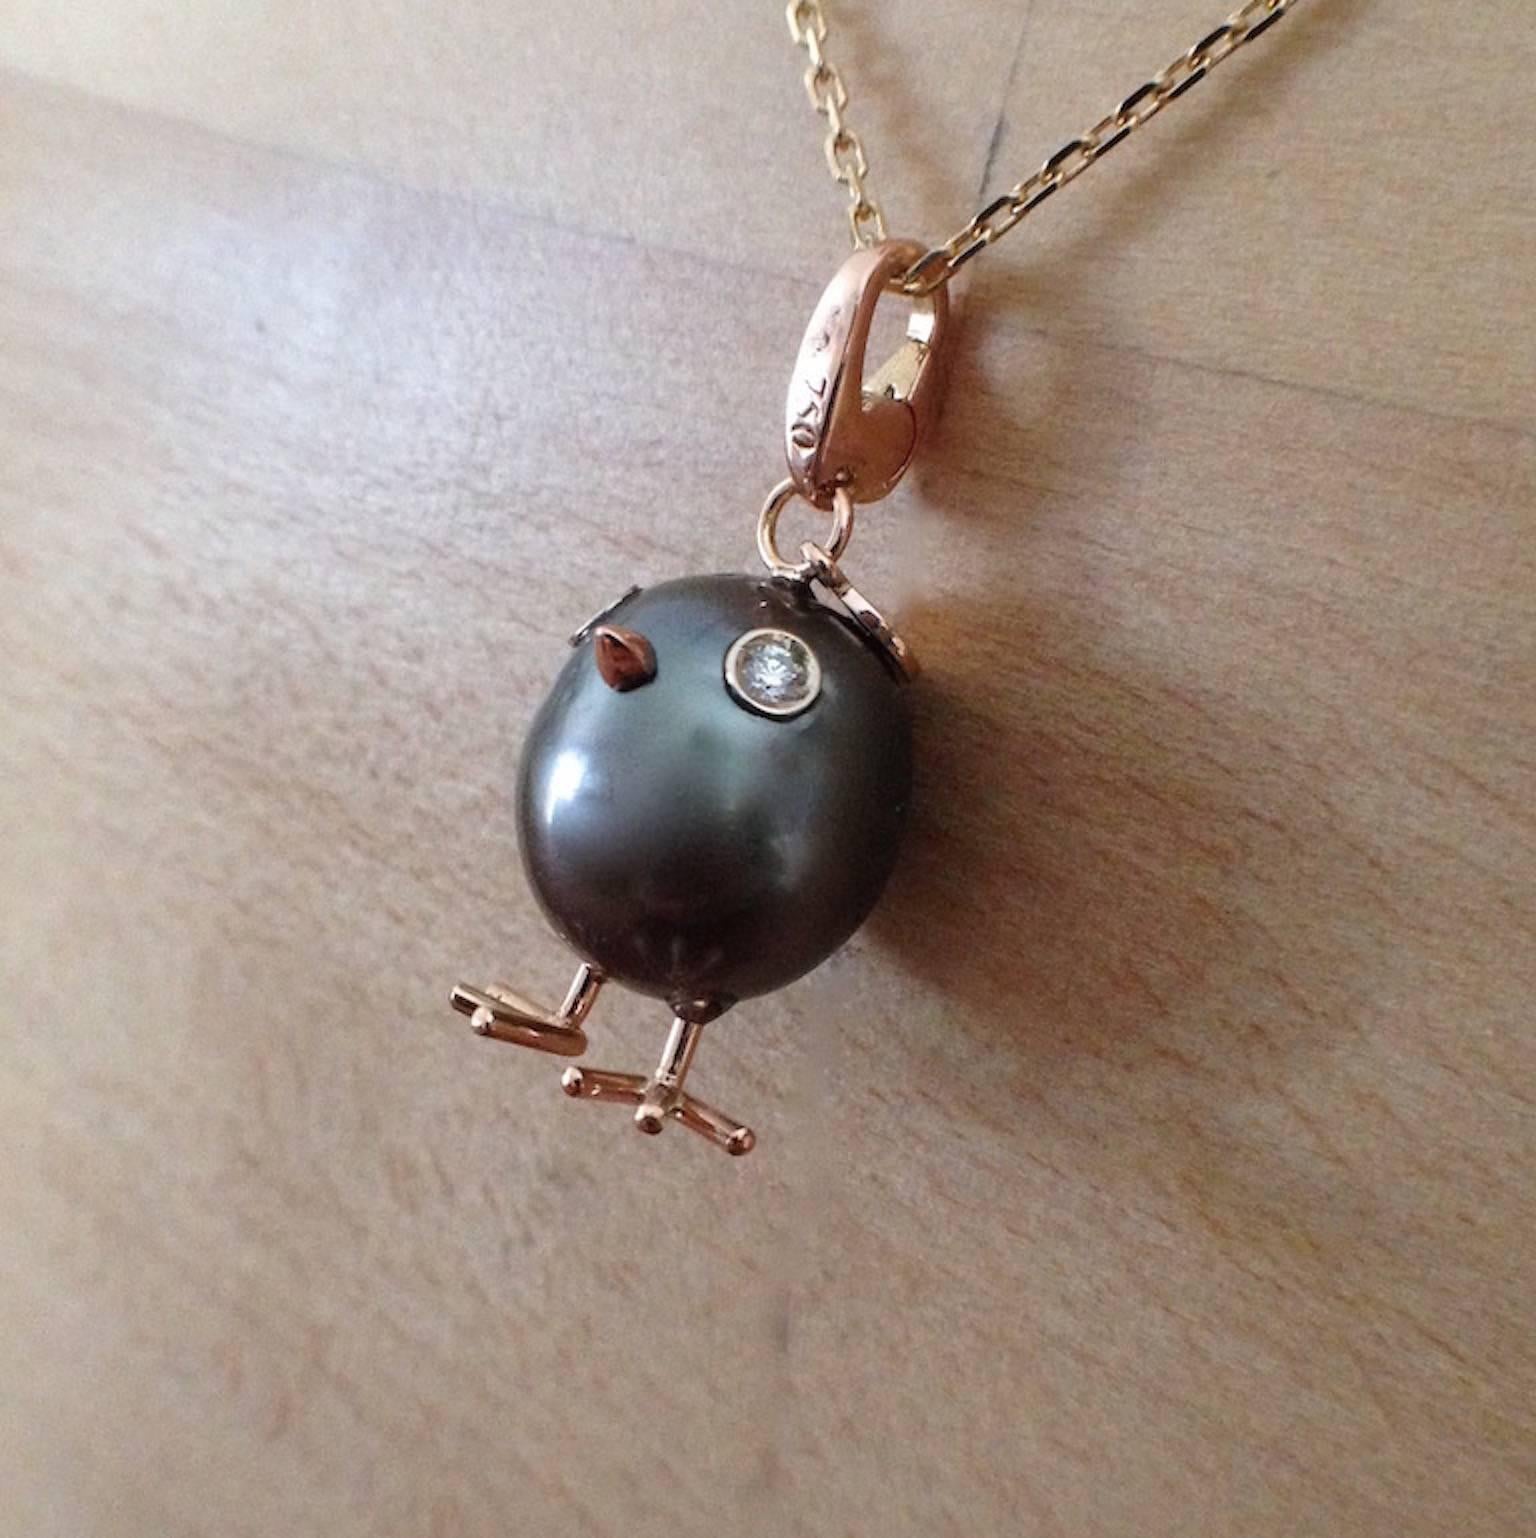 A spherical rare Tahitian pearl has been carefully crafted to make a chick. He has his two legs, two eyes encrusted with two white diamonds and his beak. The ring for the necklace is a carabiner so it can be worn also as a beautiful charm on a